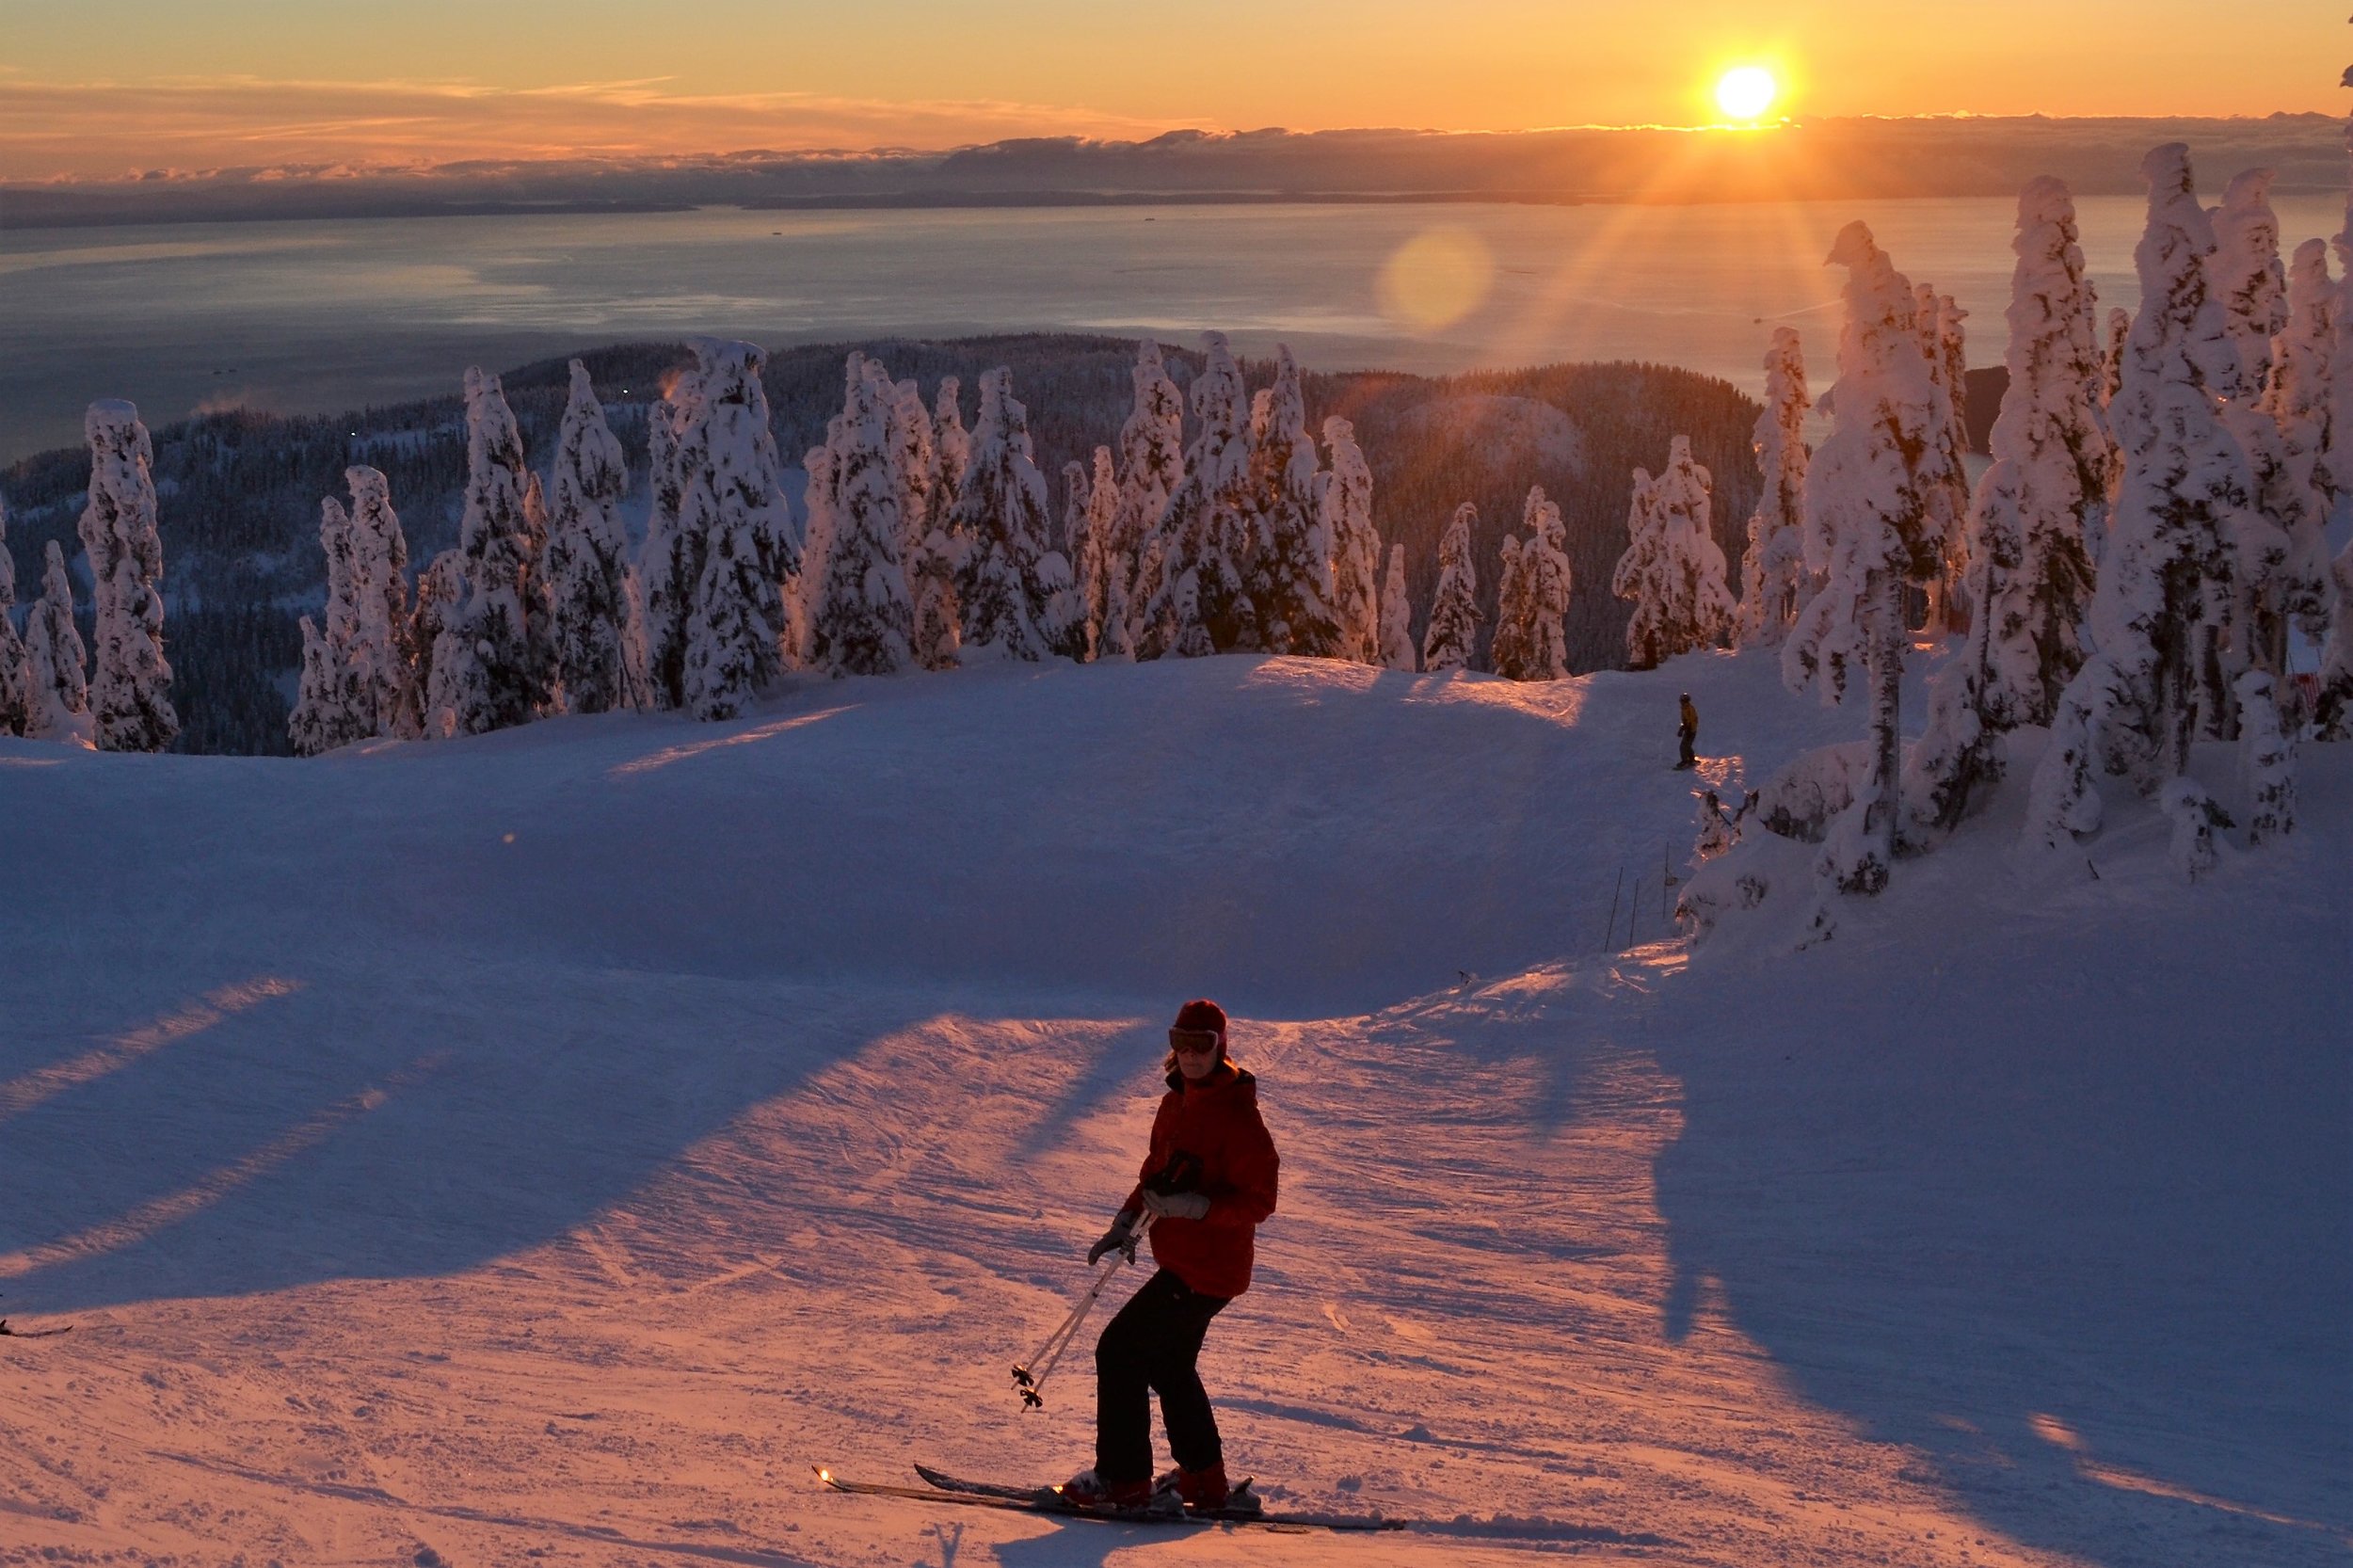 Skiing at one of the local mountains in Vancouver during sunset